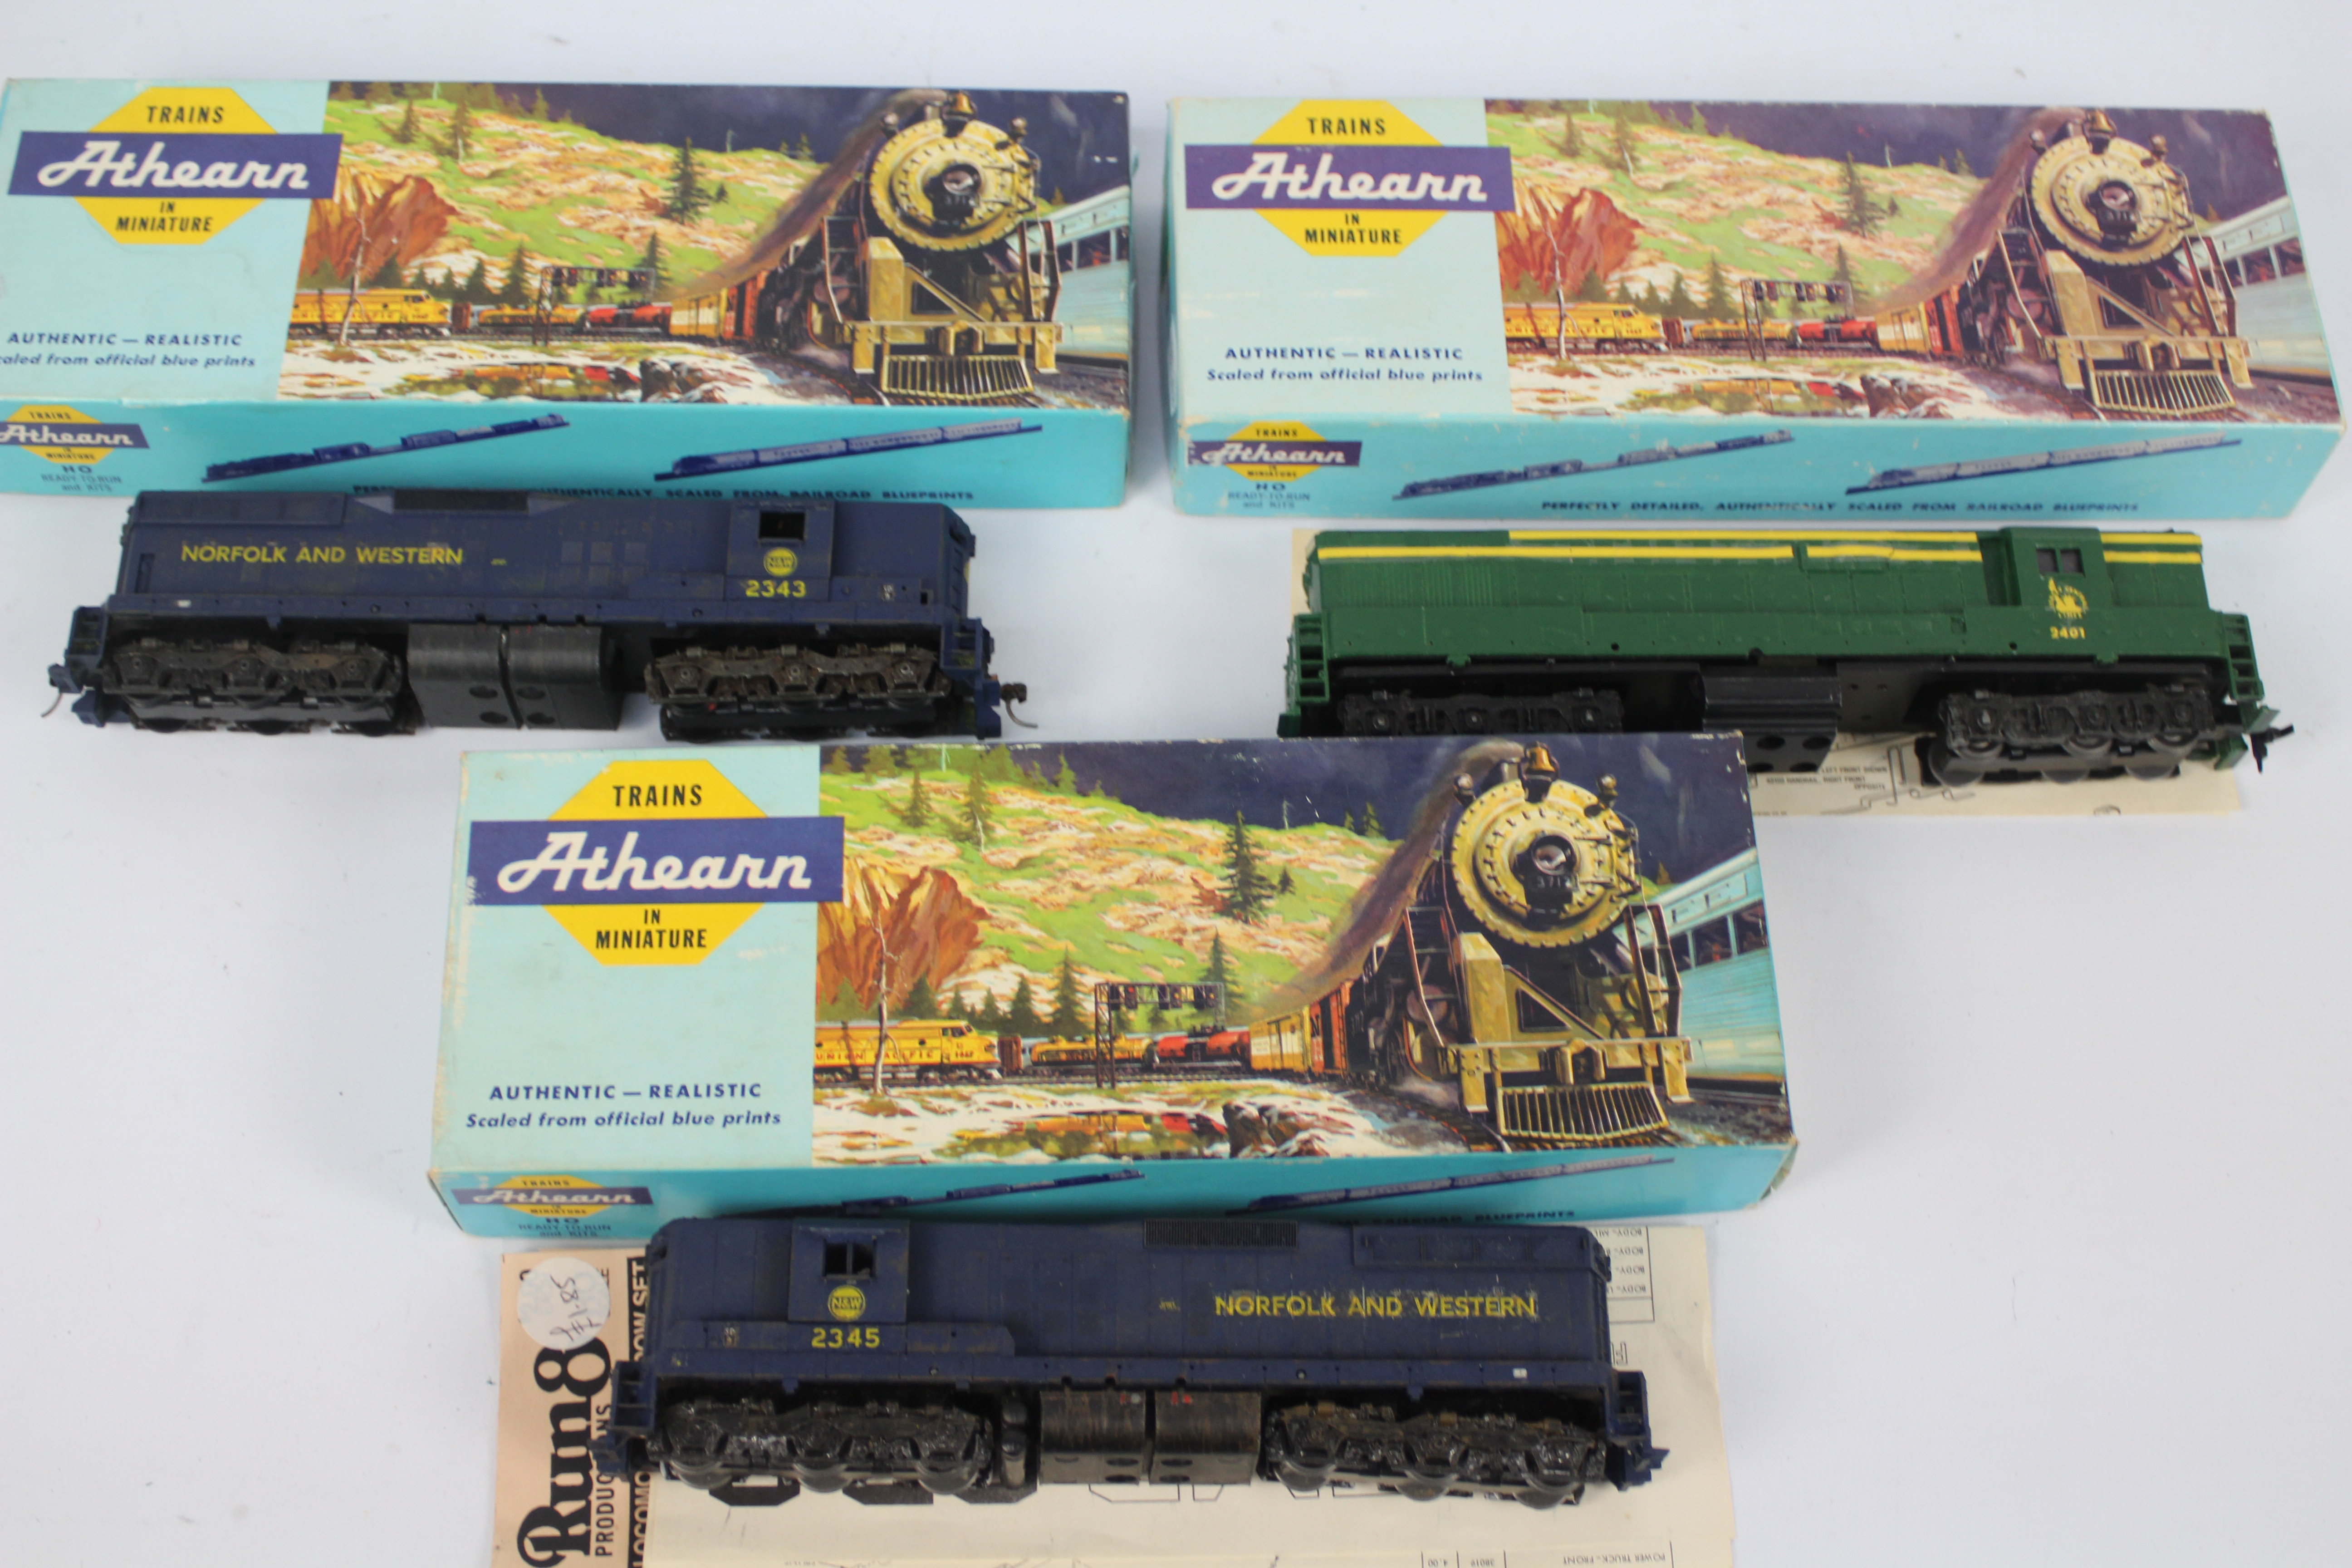 Athearn - Three boxed HO gauge American diesel road locomotive kits from Athearn.